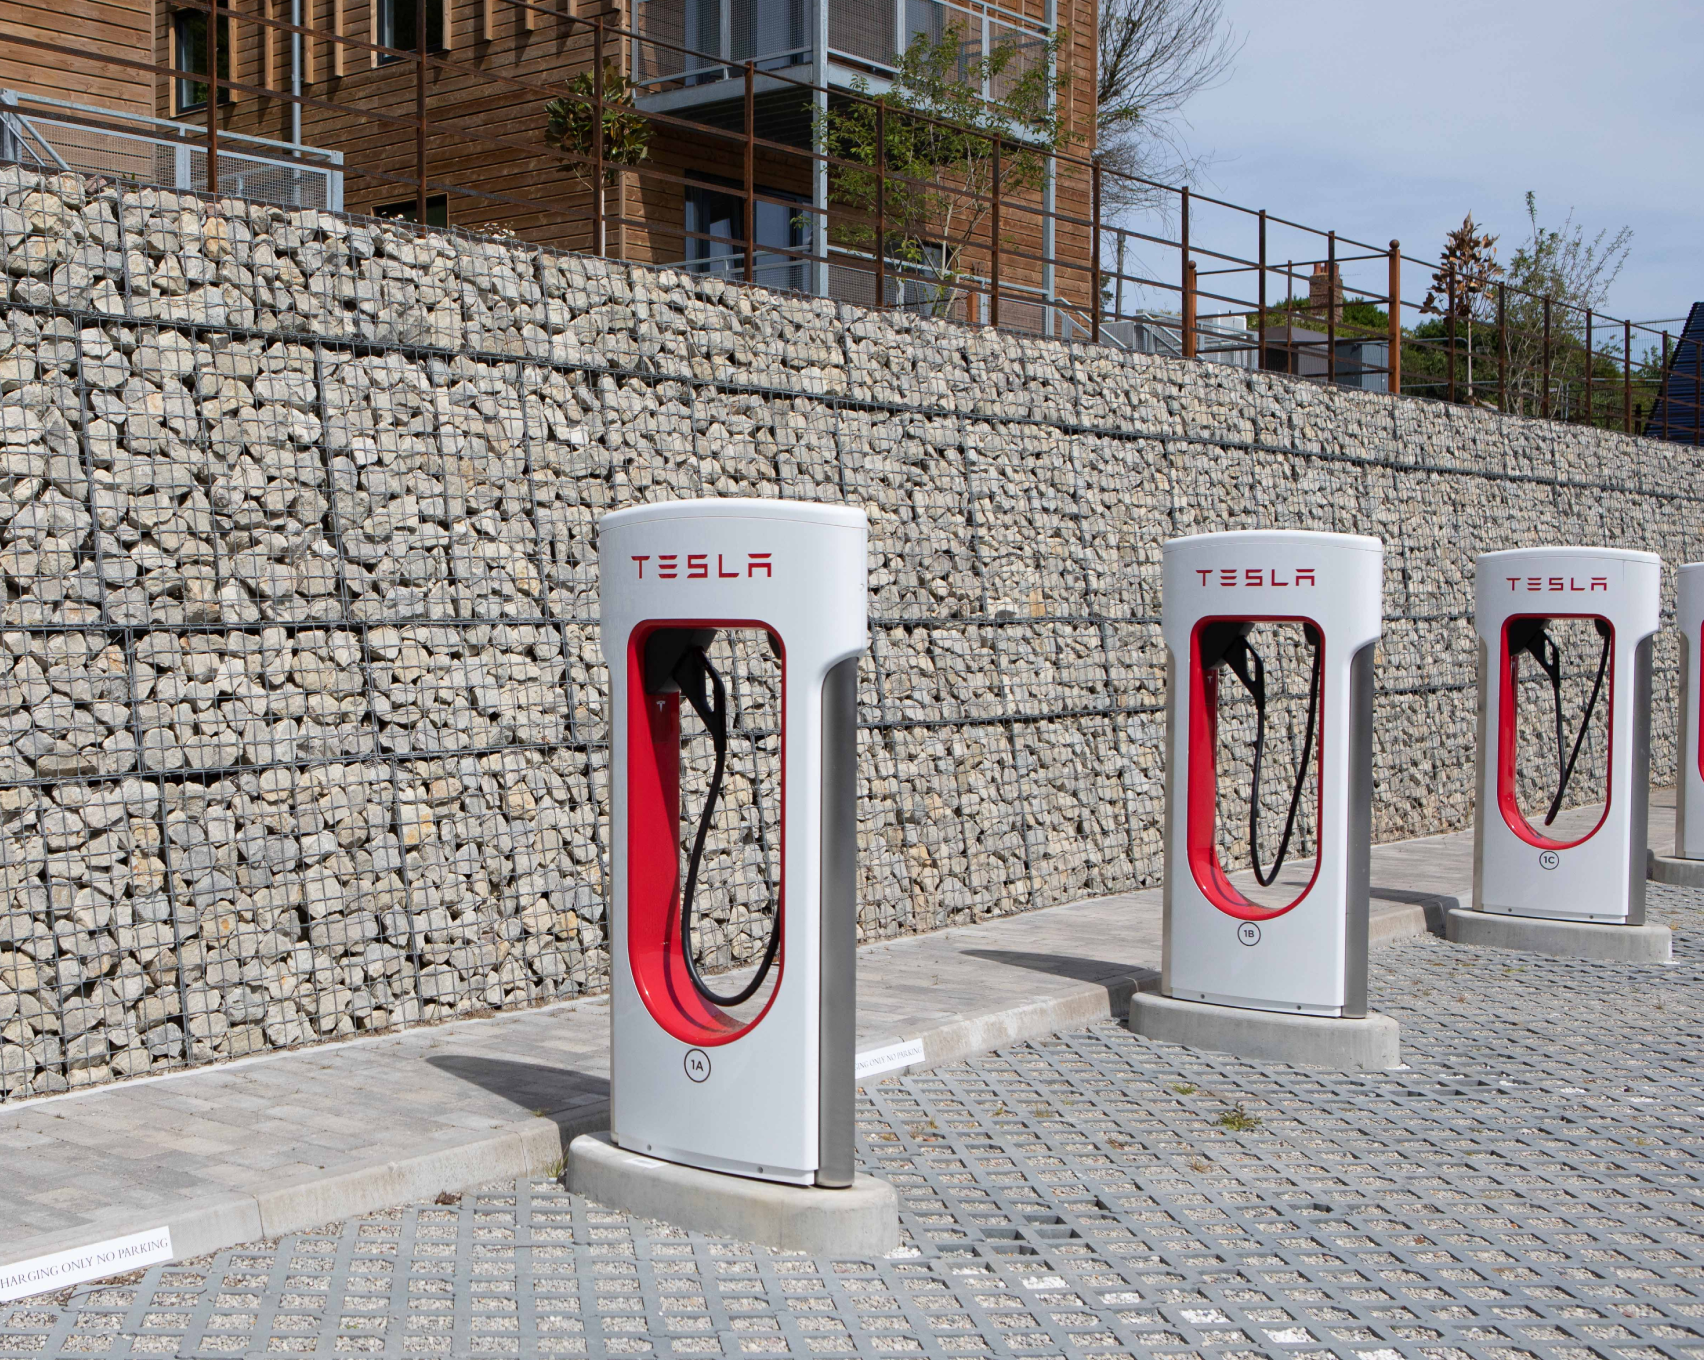 Electric charging points